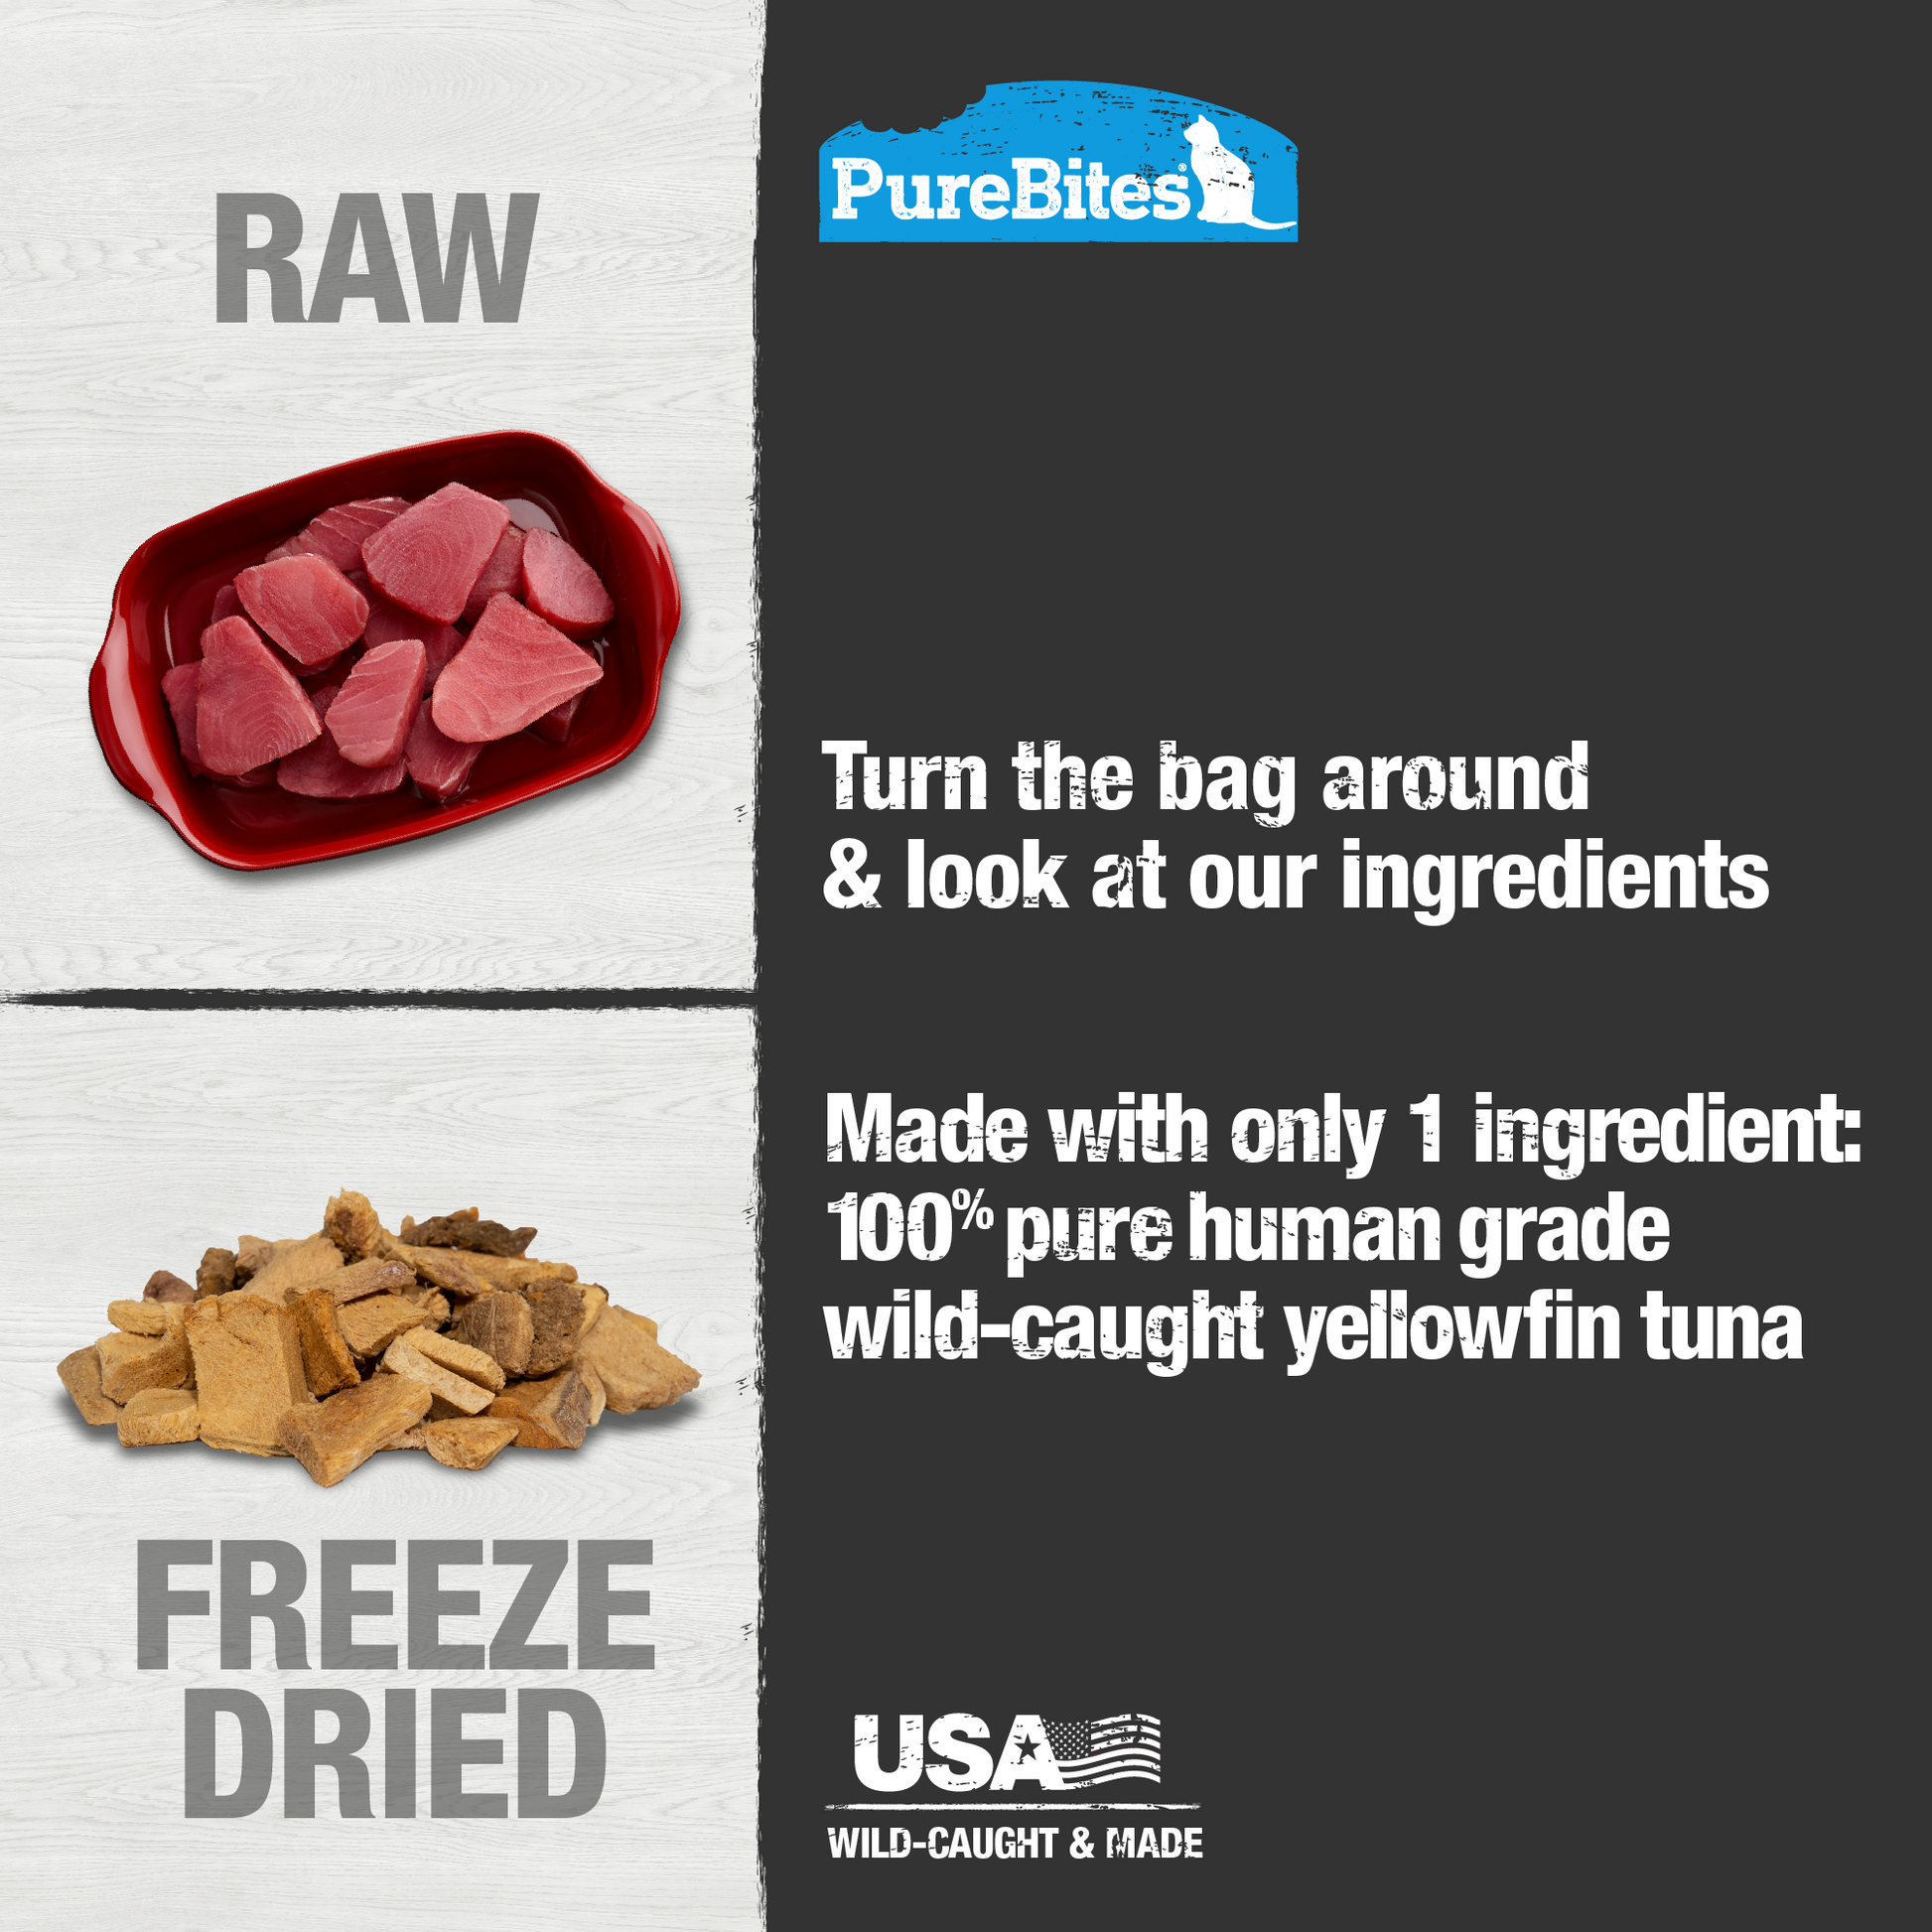 Made with only 1 Ingredient you can read, pronounce, and trust: USA sourced wild-caught human grade tuna.